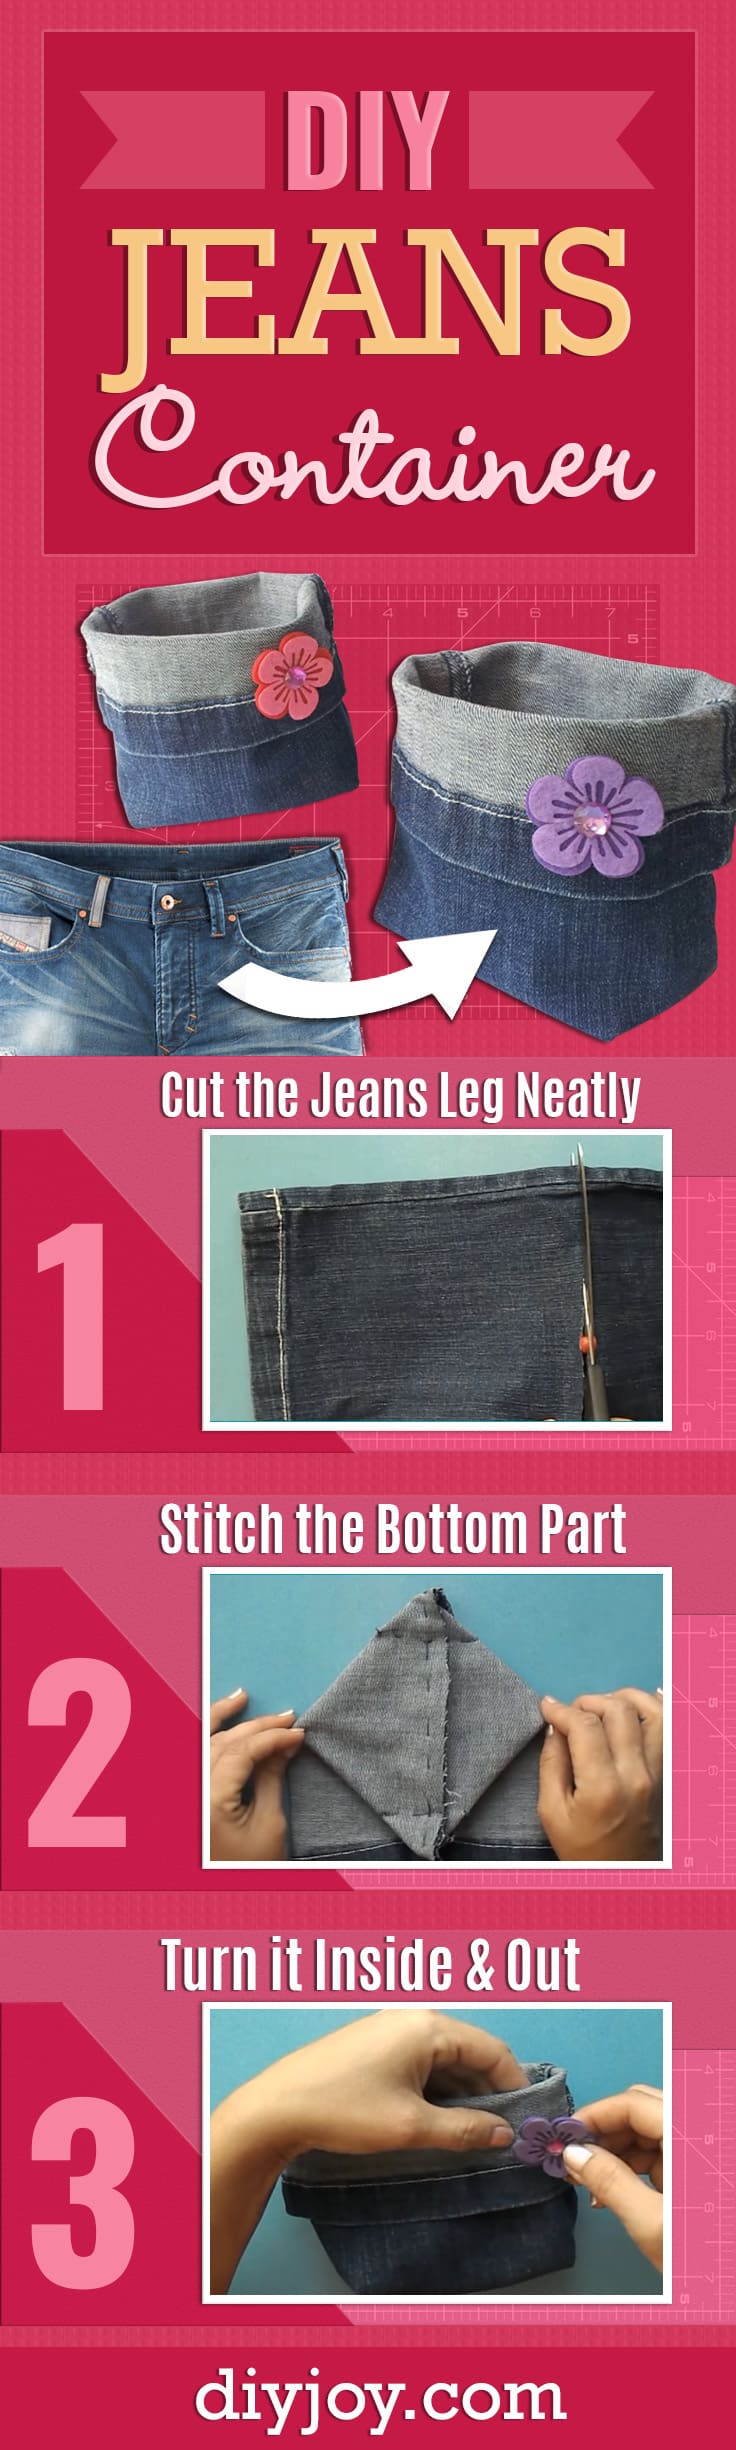 DIY Jeans Container - Cool DIY Projects and Crafts to Make From Old Denim Jeans - Easy Step by Step Sewing Tutorial for a Cool DIY Christmas Gift Idea - DIY Projects and Crafts for Women